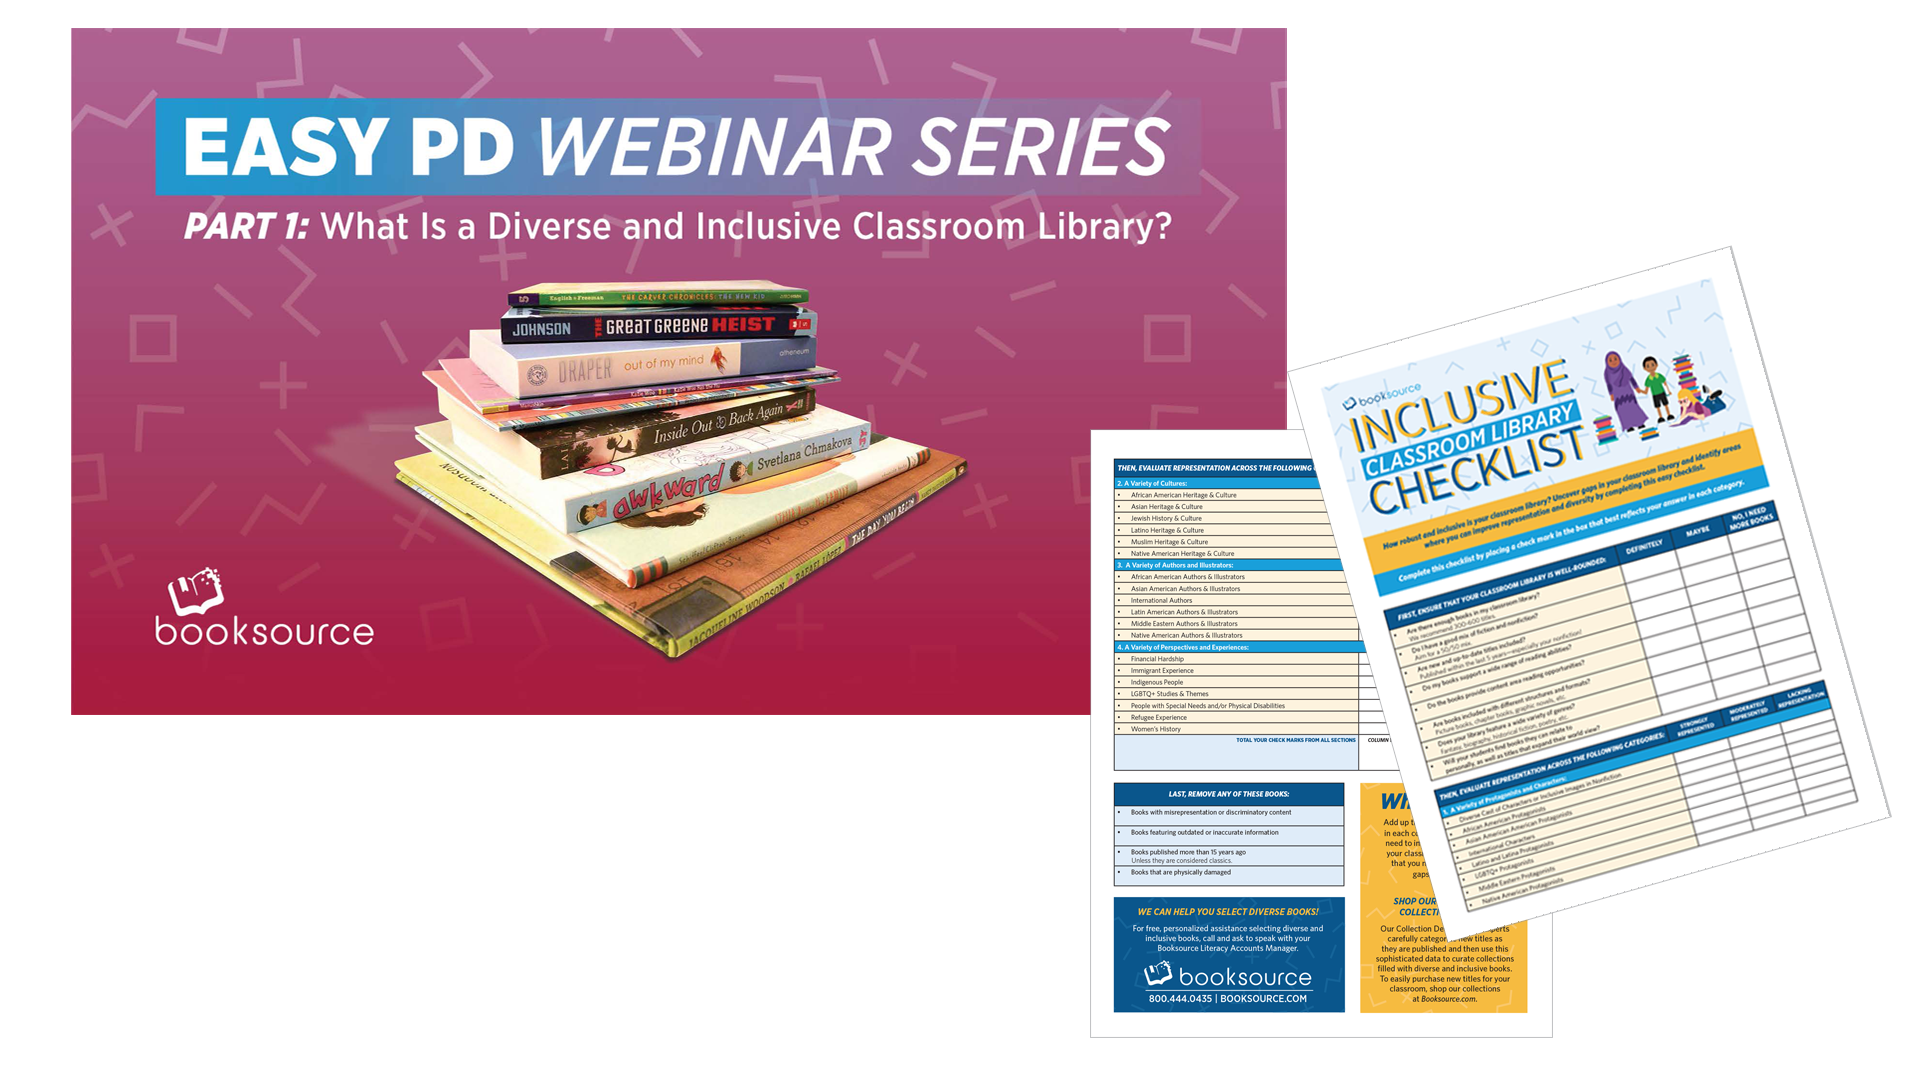 Part 1: What Is a Diverse and Inclusive Classroom Library?